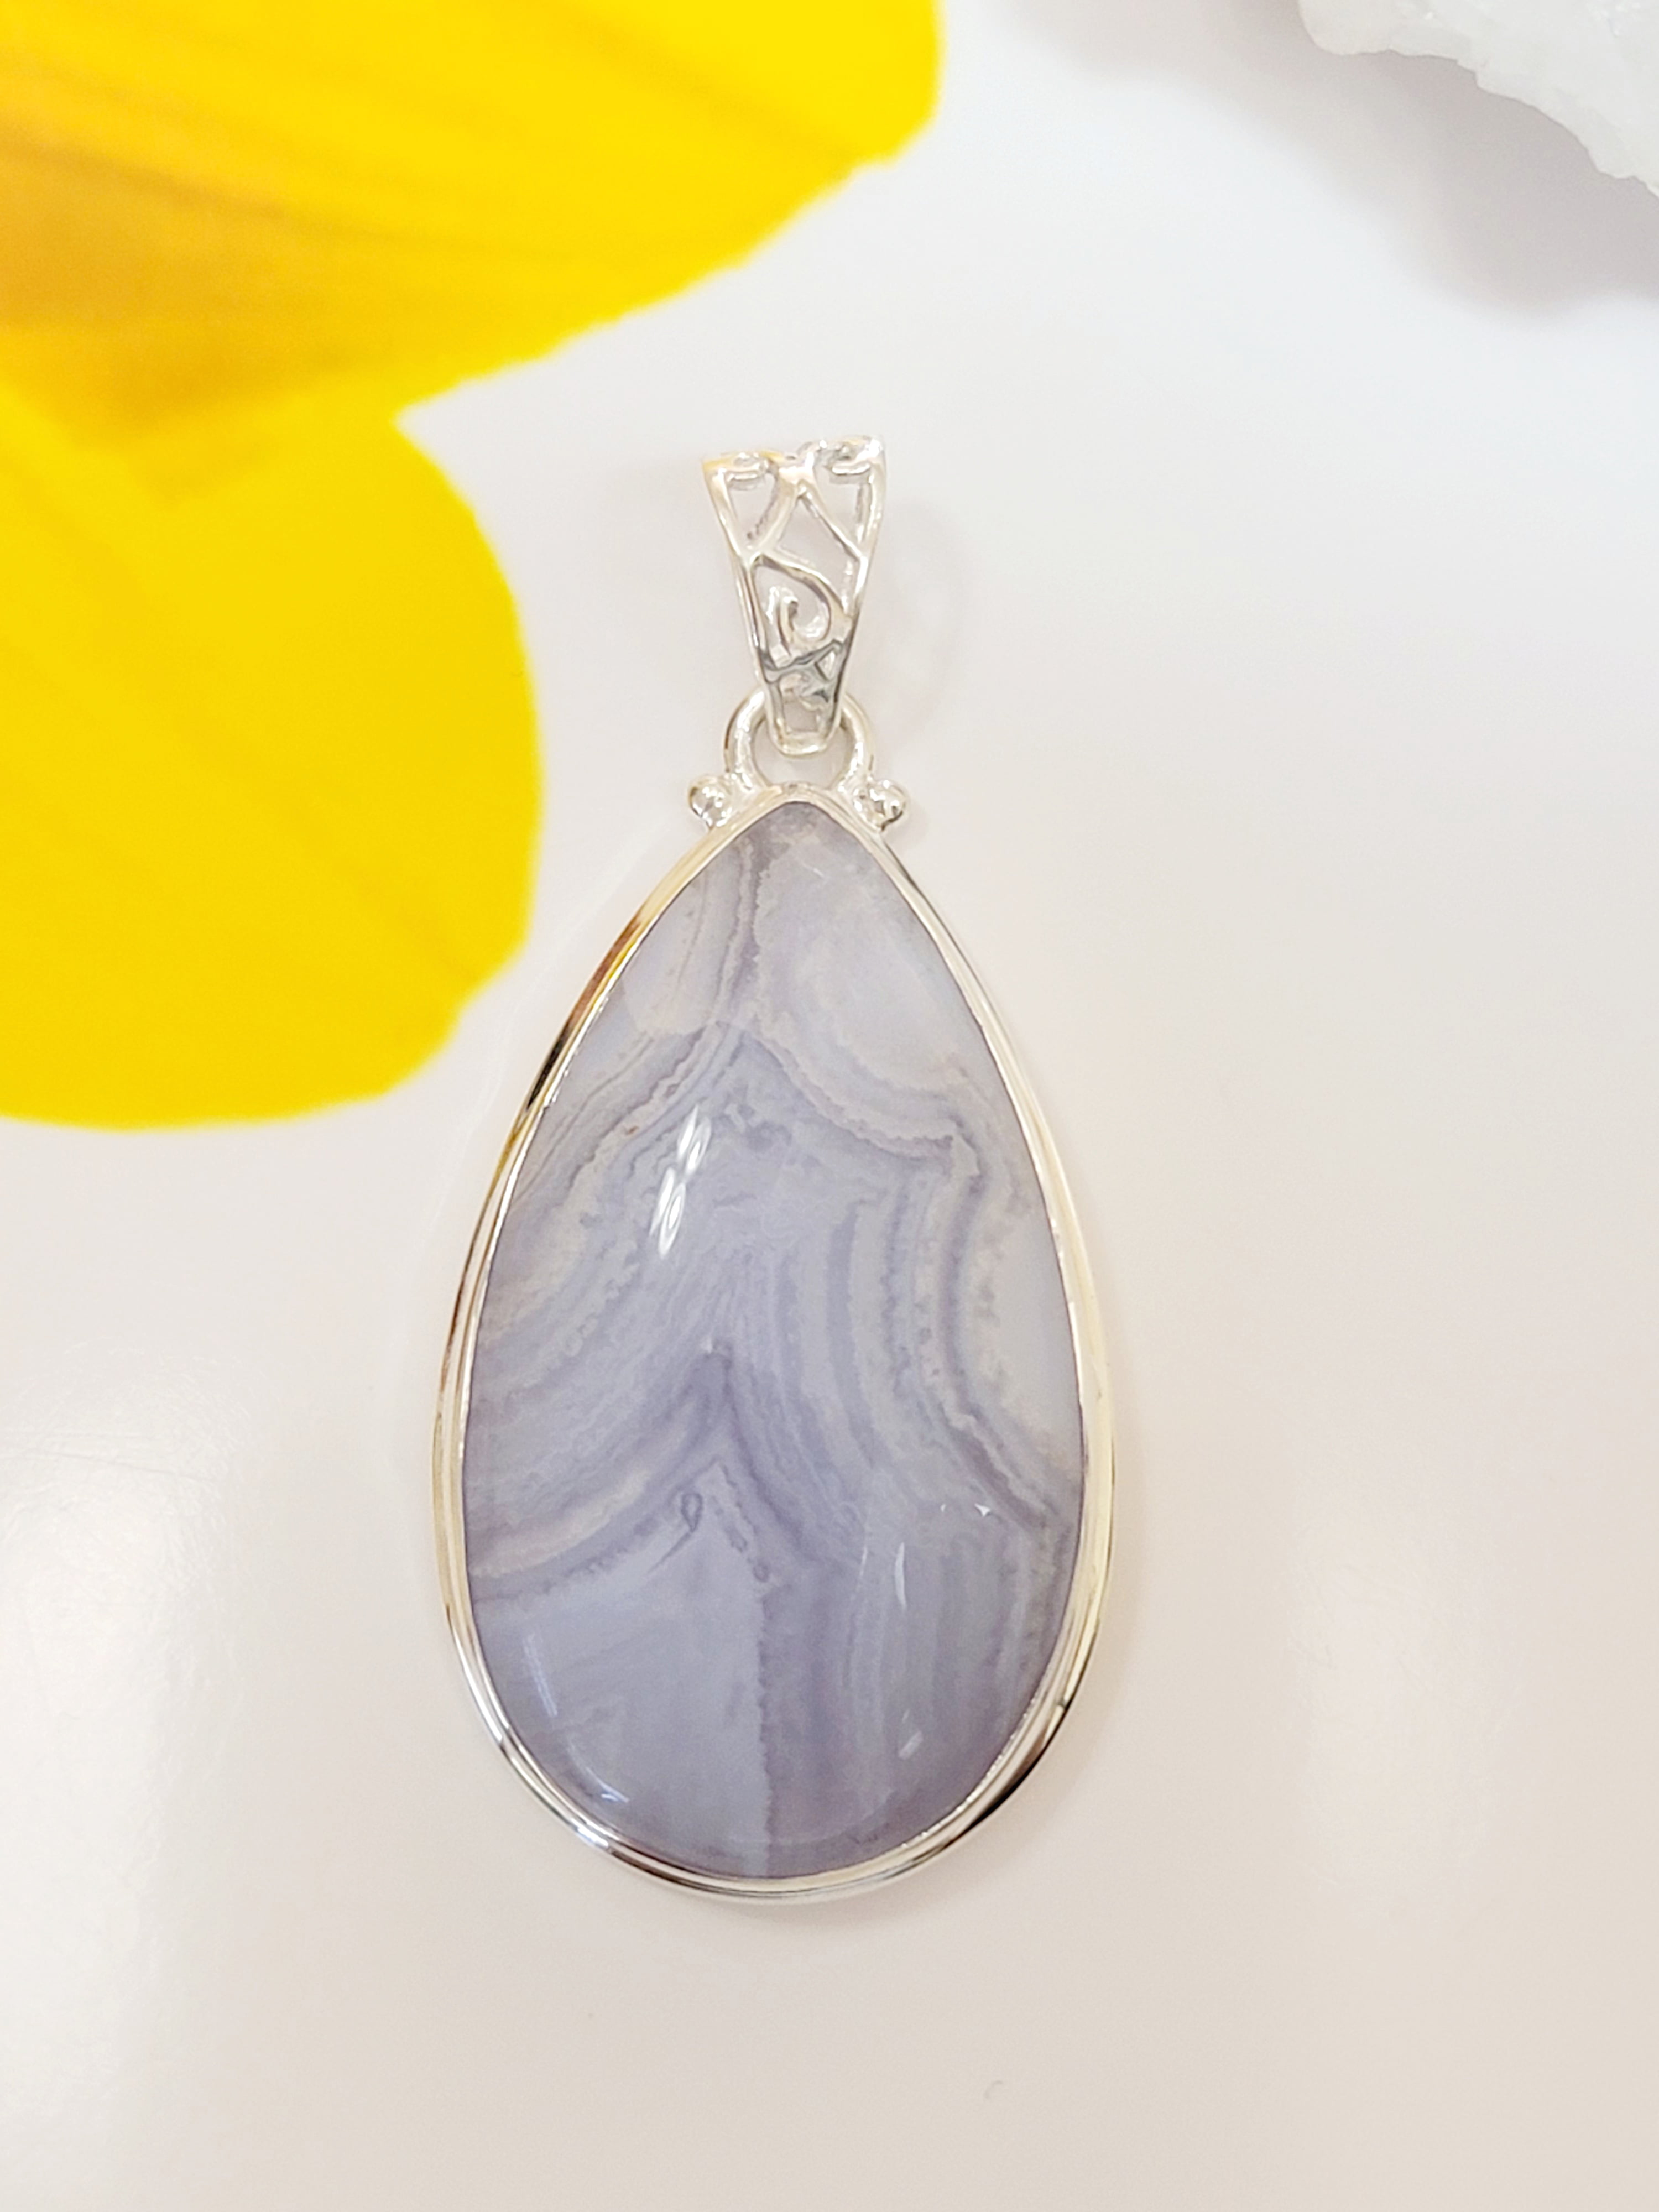 Tooth Style Pendant Blue Lace Agate Pendant With 18 or 24 Metal Chain! AA Quality